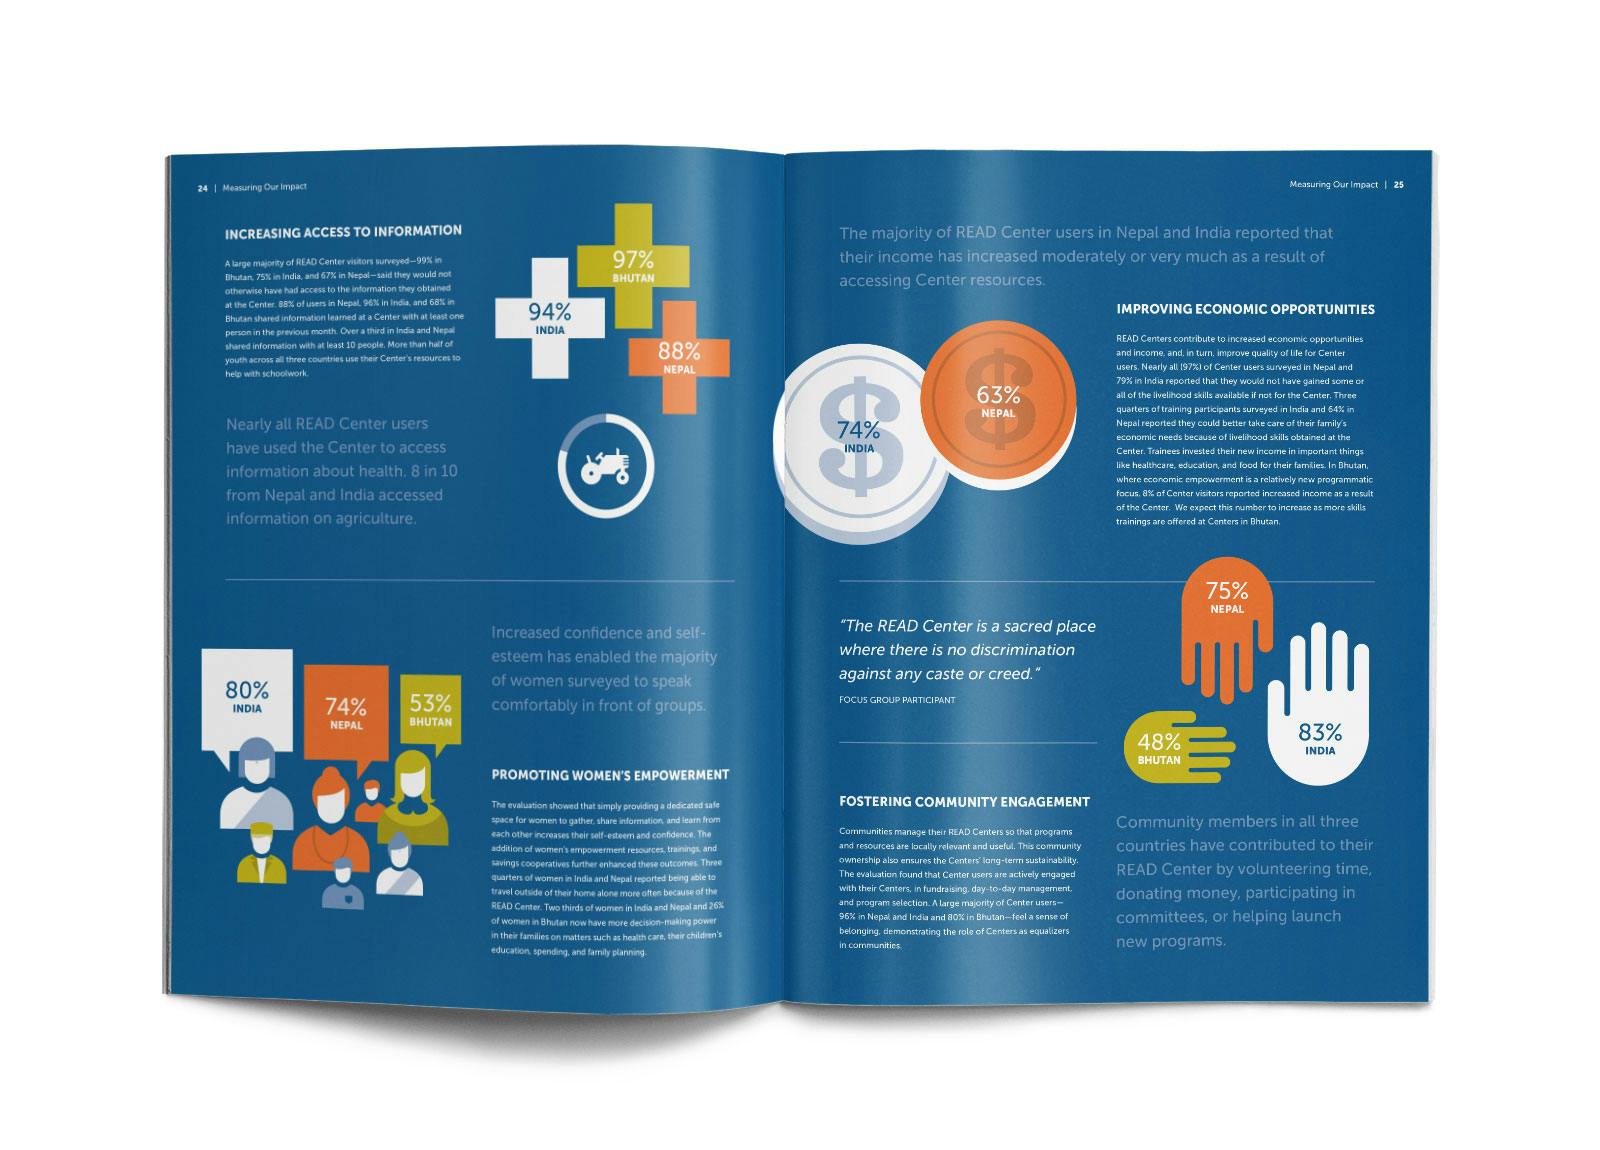 Photo of a copy of the 2014 Annual Empowerment Report showing infographics and text